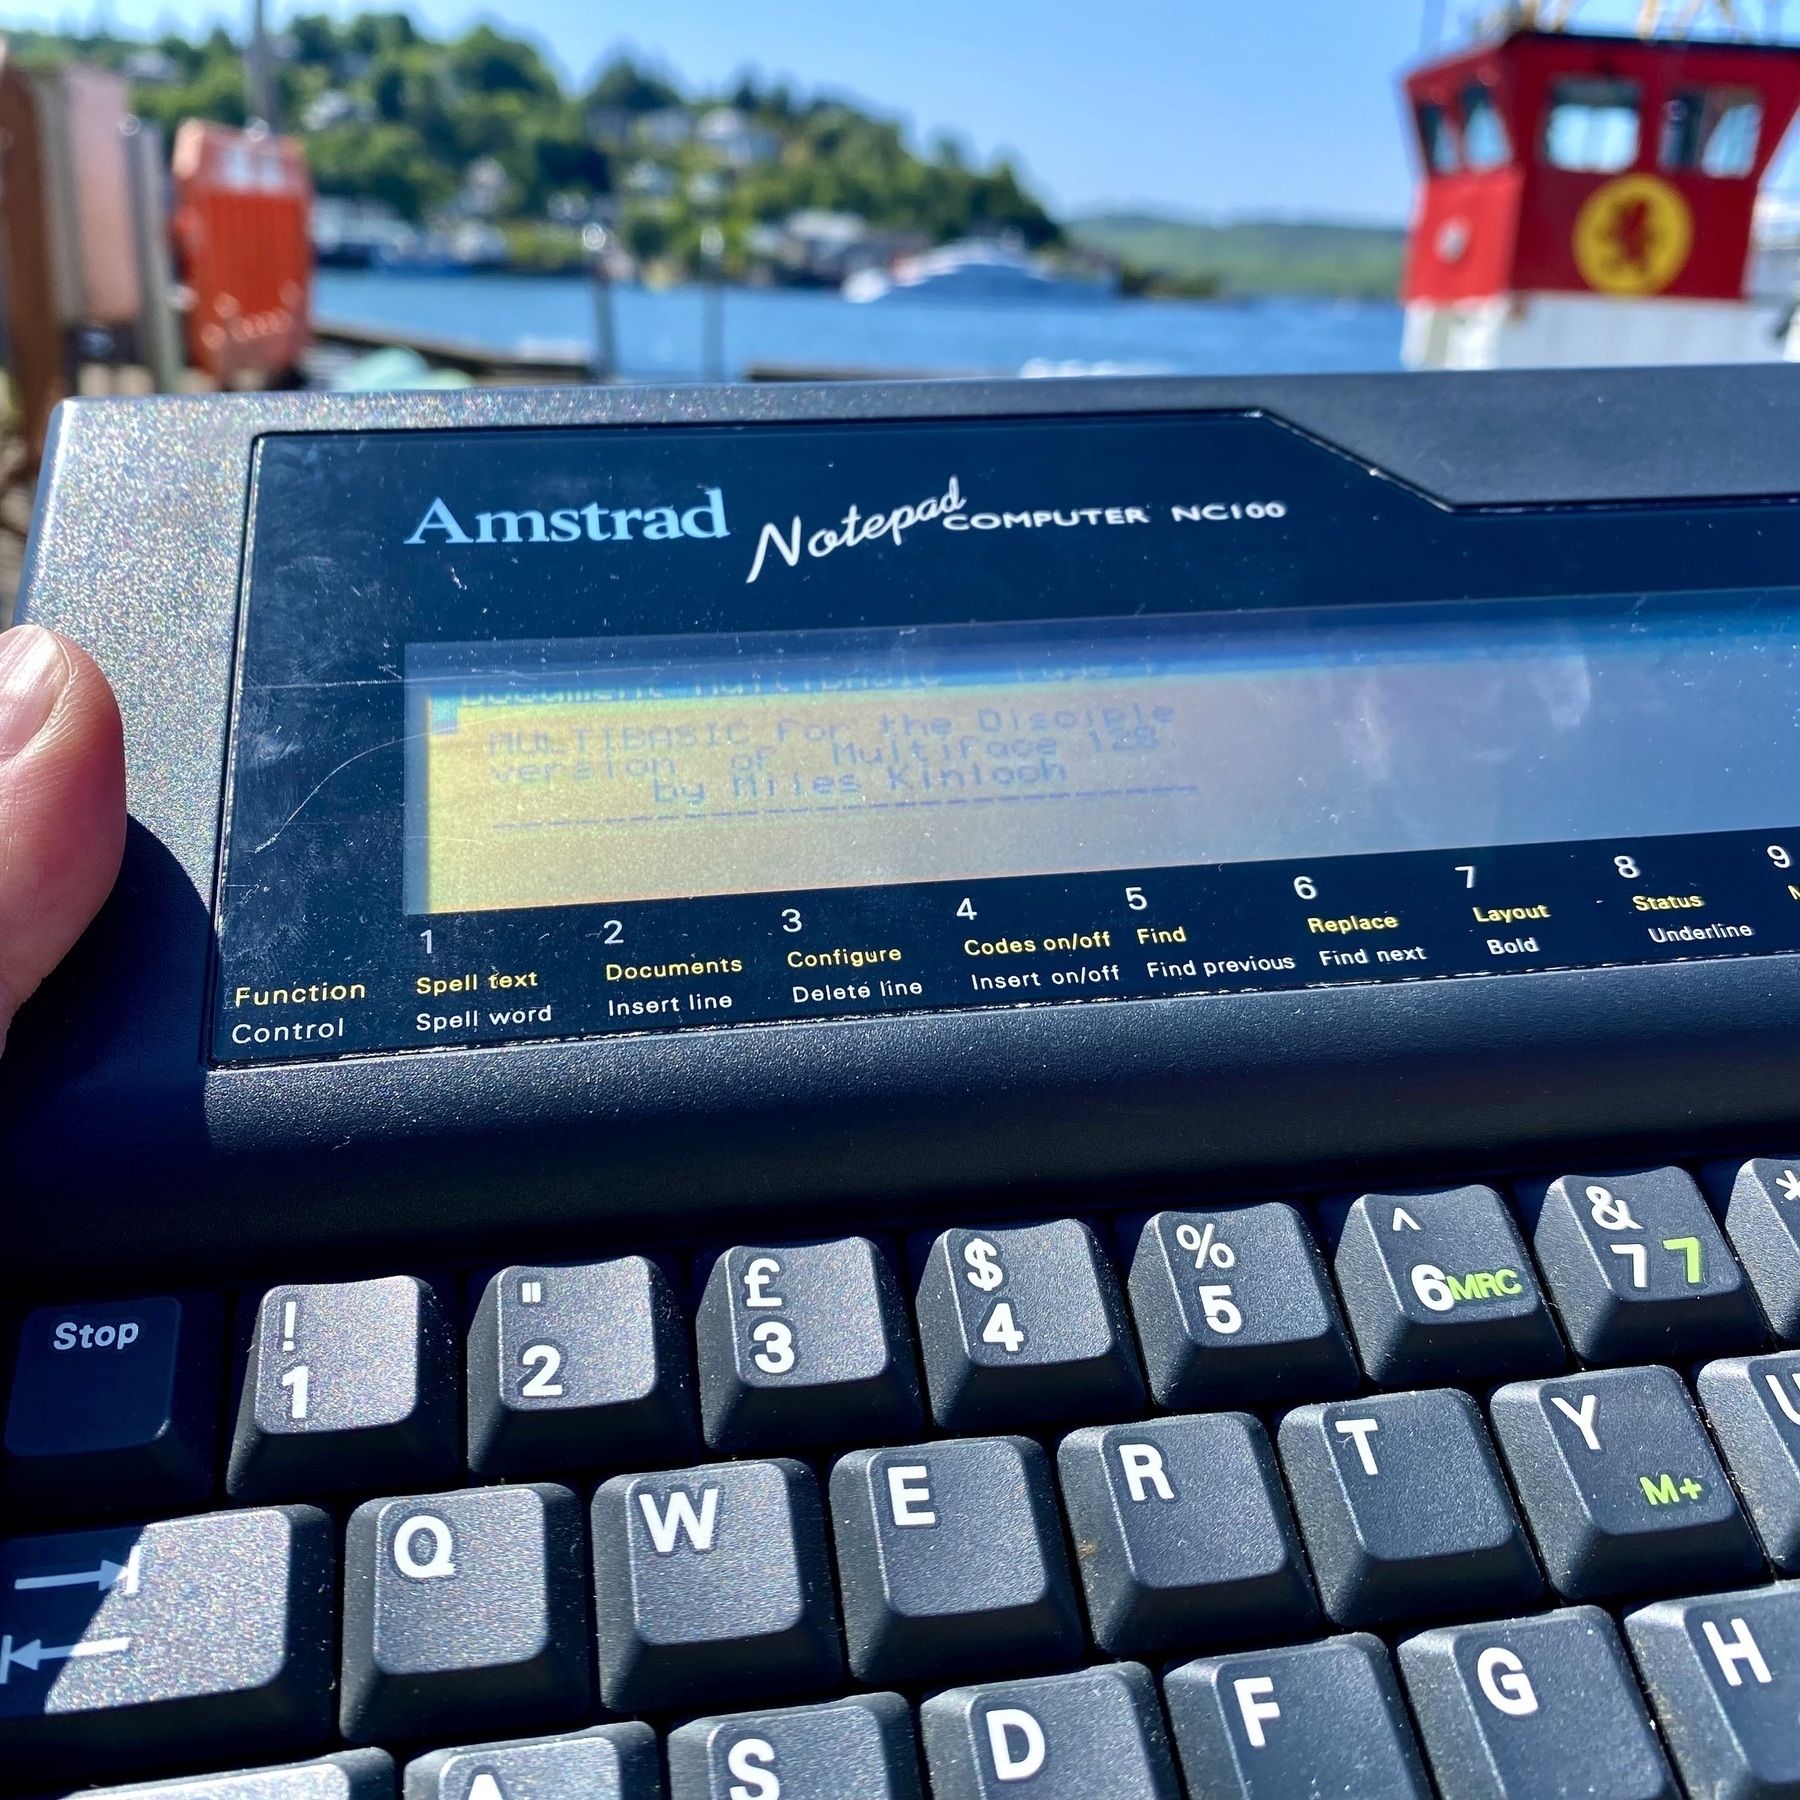 Photograph of Amstrad NC100 computer in the sunshine by the harbour